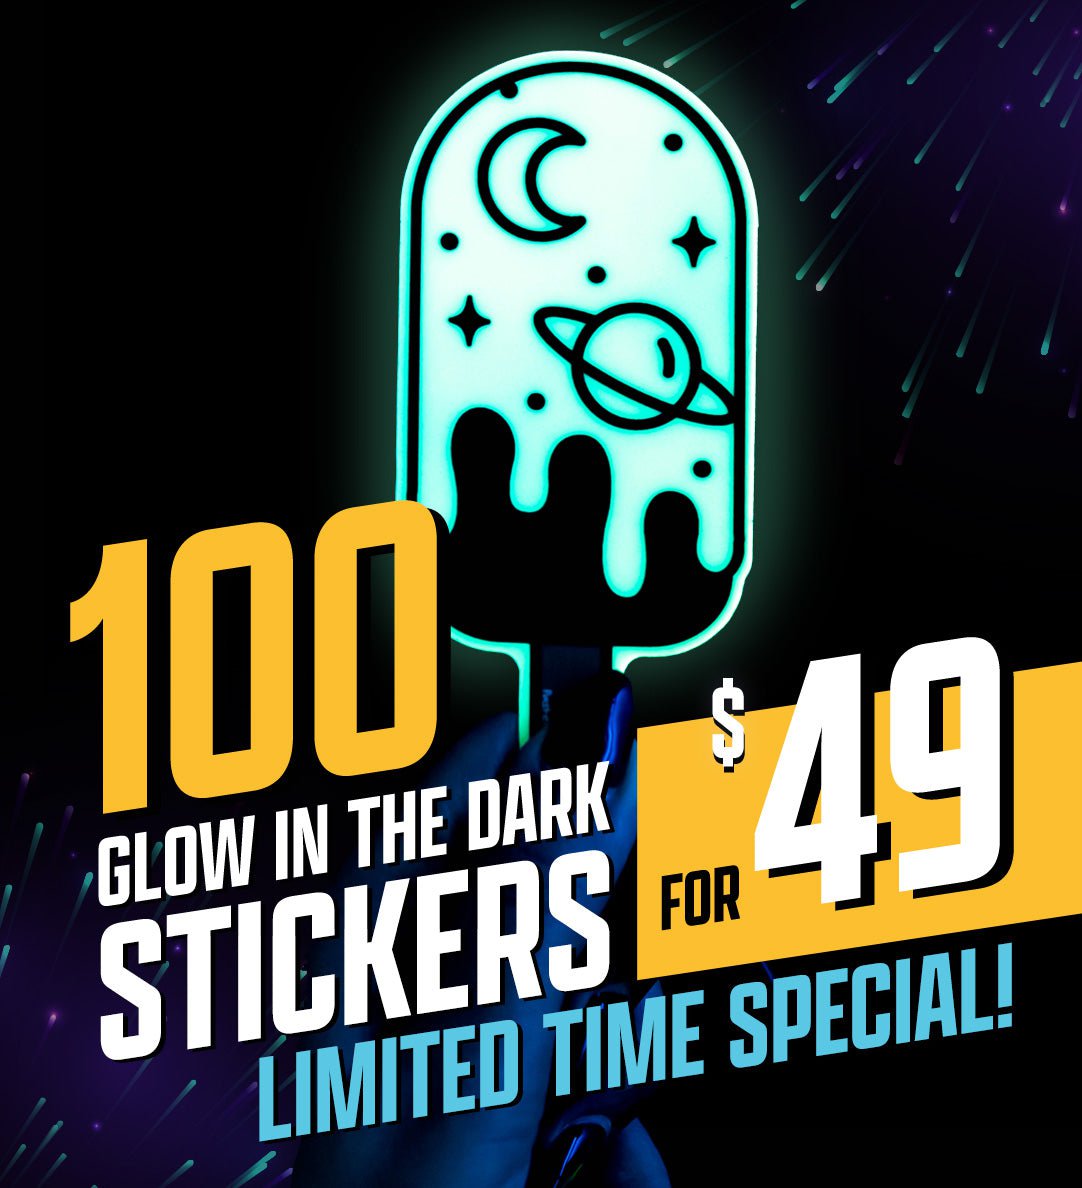 Custom Glow In The Dark Stickers Made with High Quality Vinyl Material